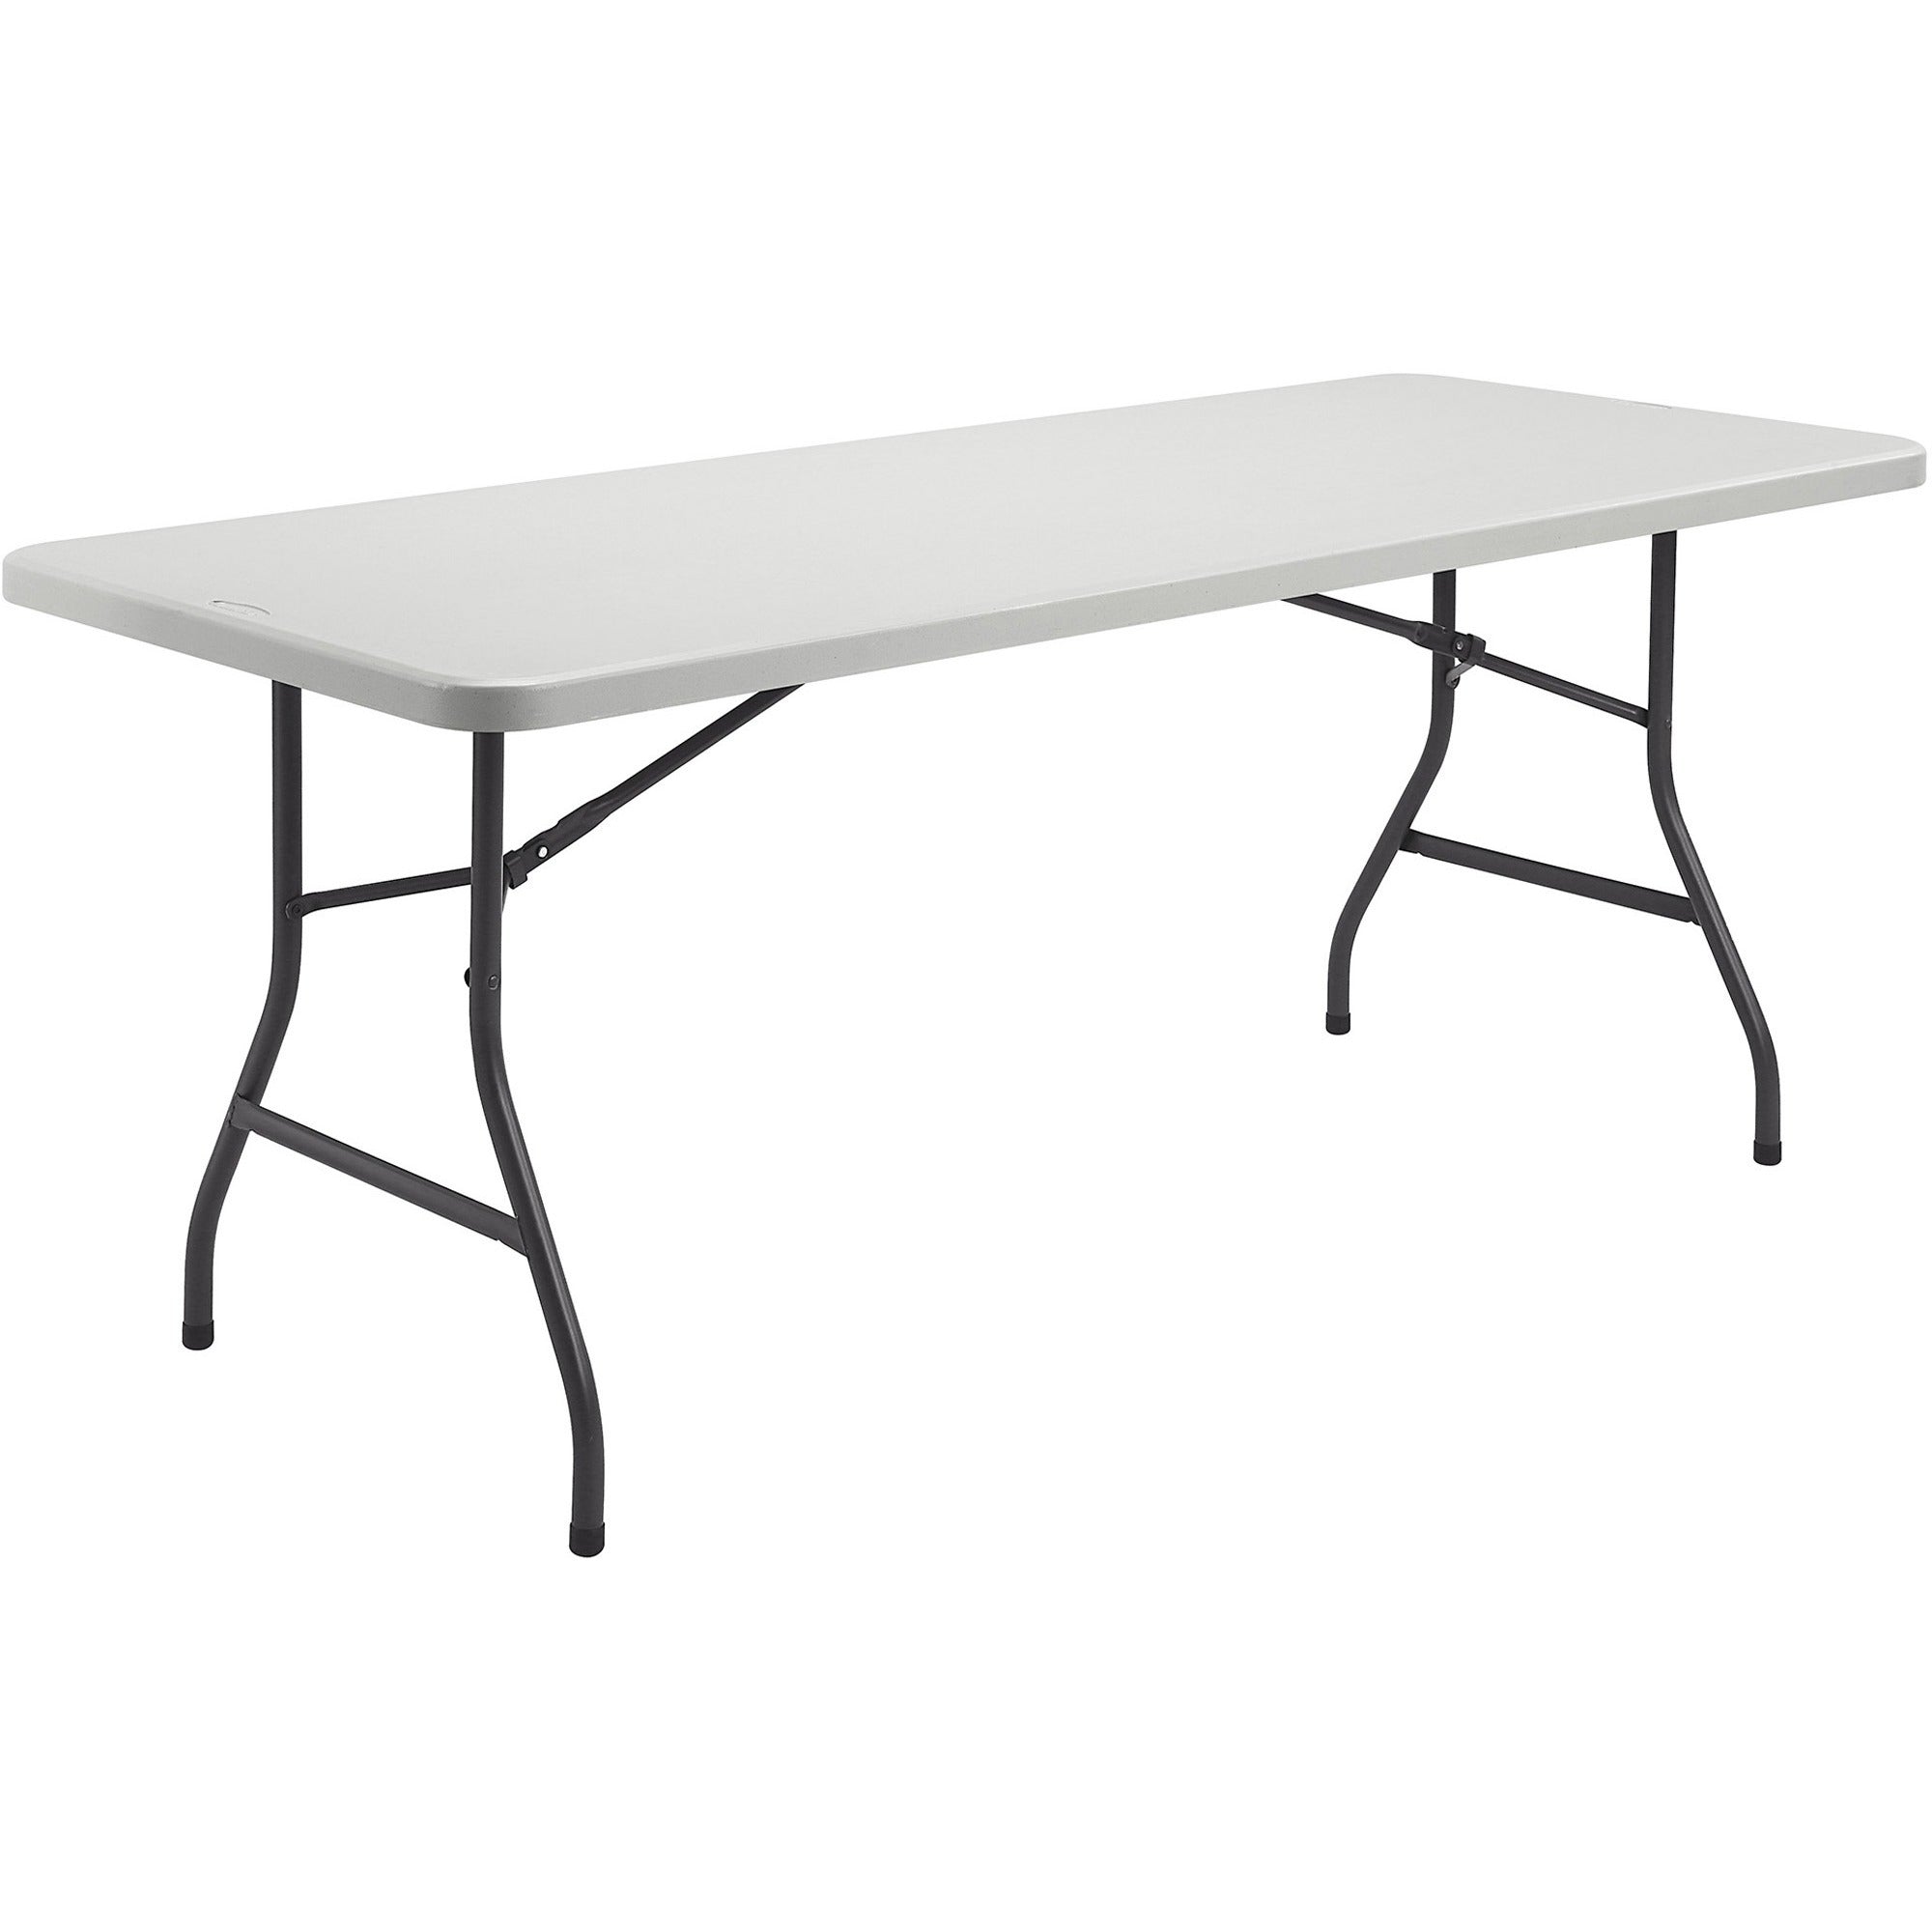 lorell-ultra-lite-banquet-table-for-table-toplight-gray-rectangle-top-dark-gray-base-600-lb-capacity-x-96-table-top-width-x-30-table-top-depth-x-2-table-top-thickness-29-height-gray-1-each_llr66654 - 4